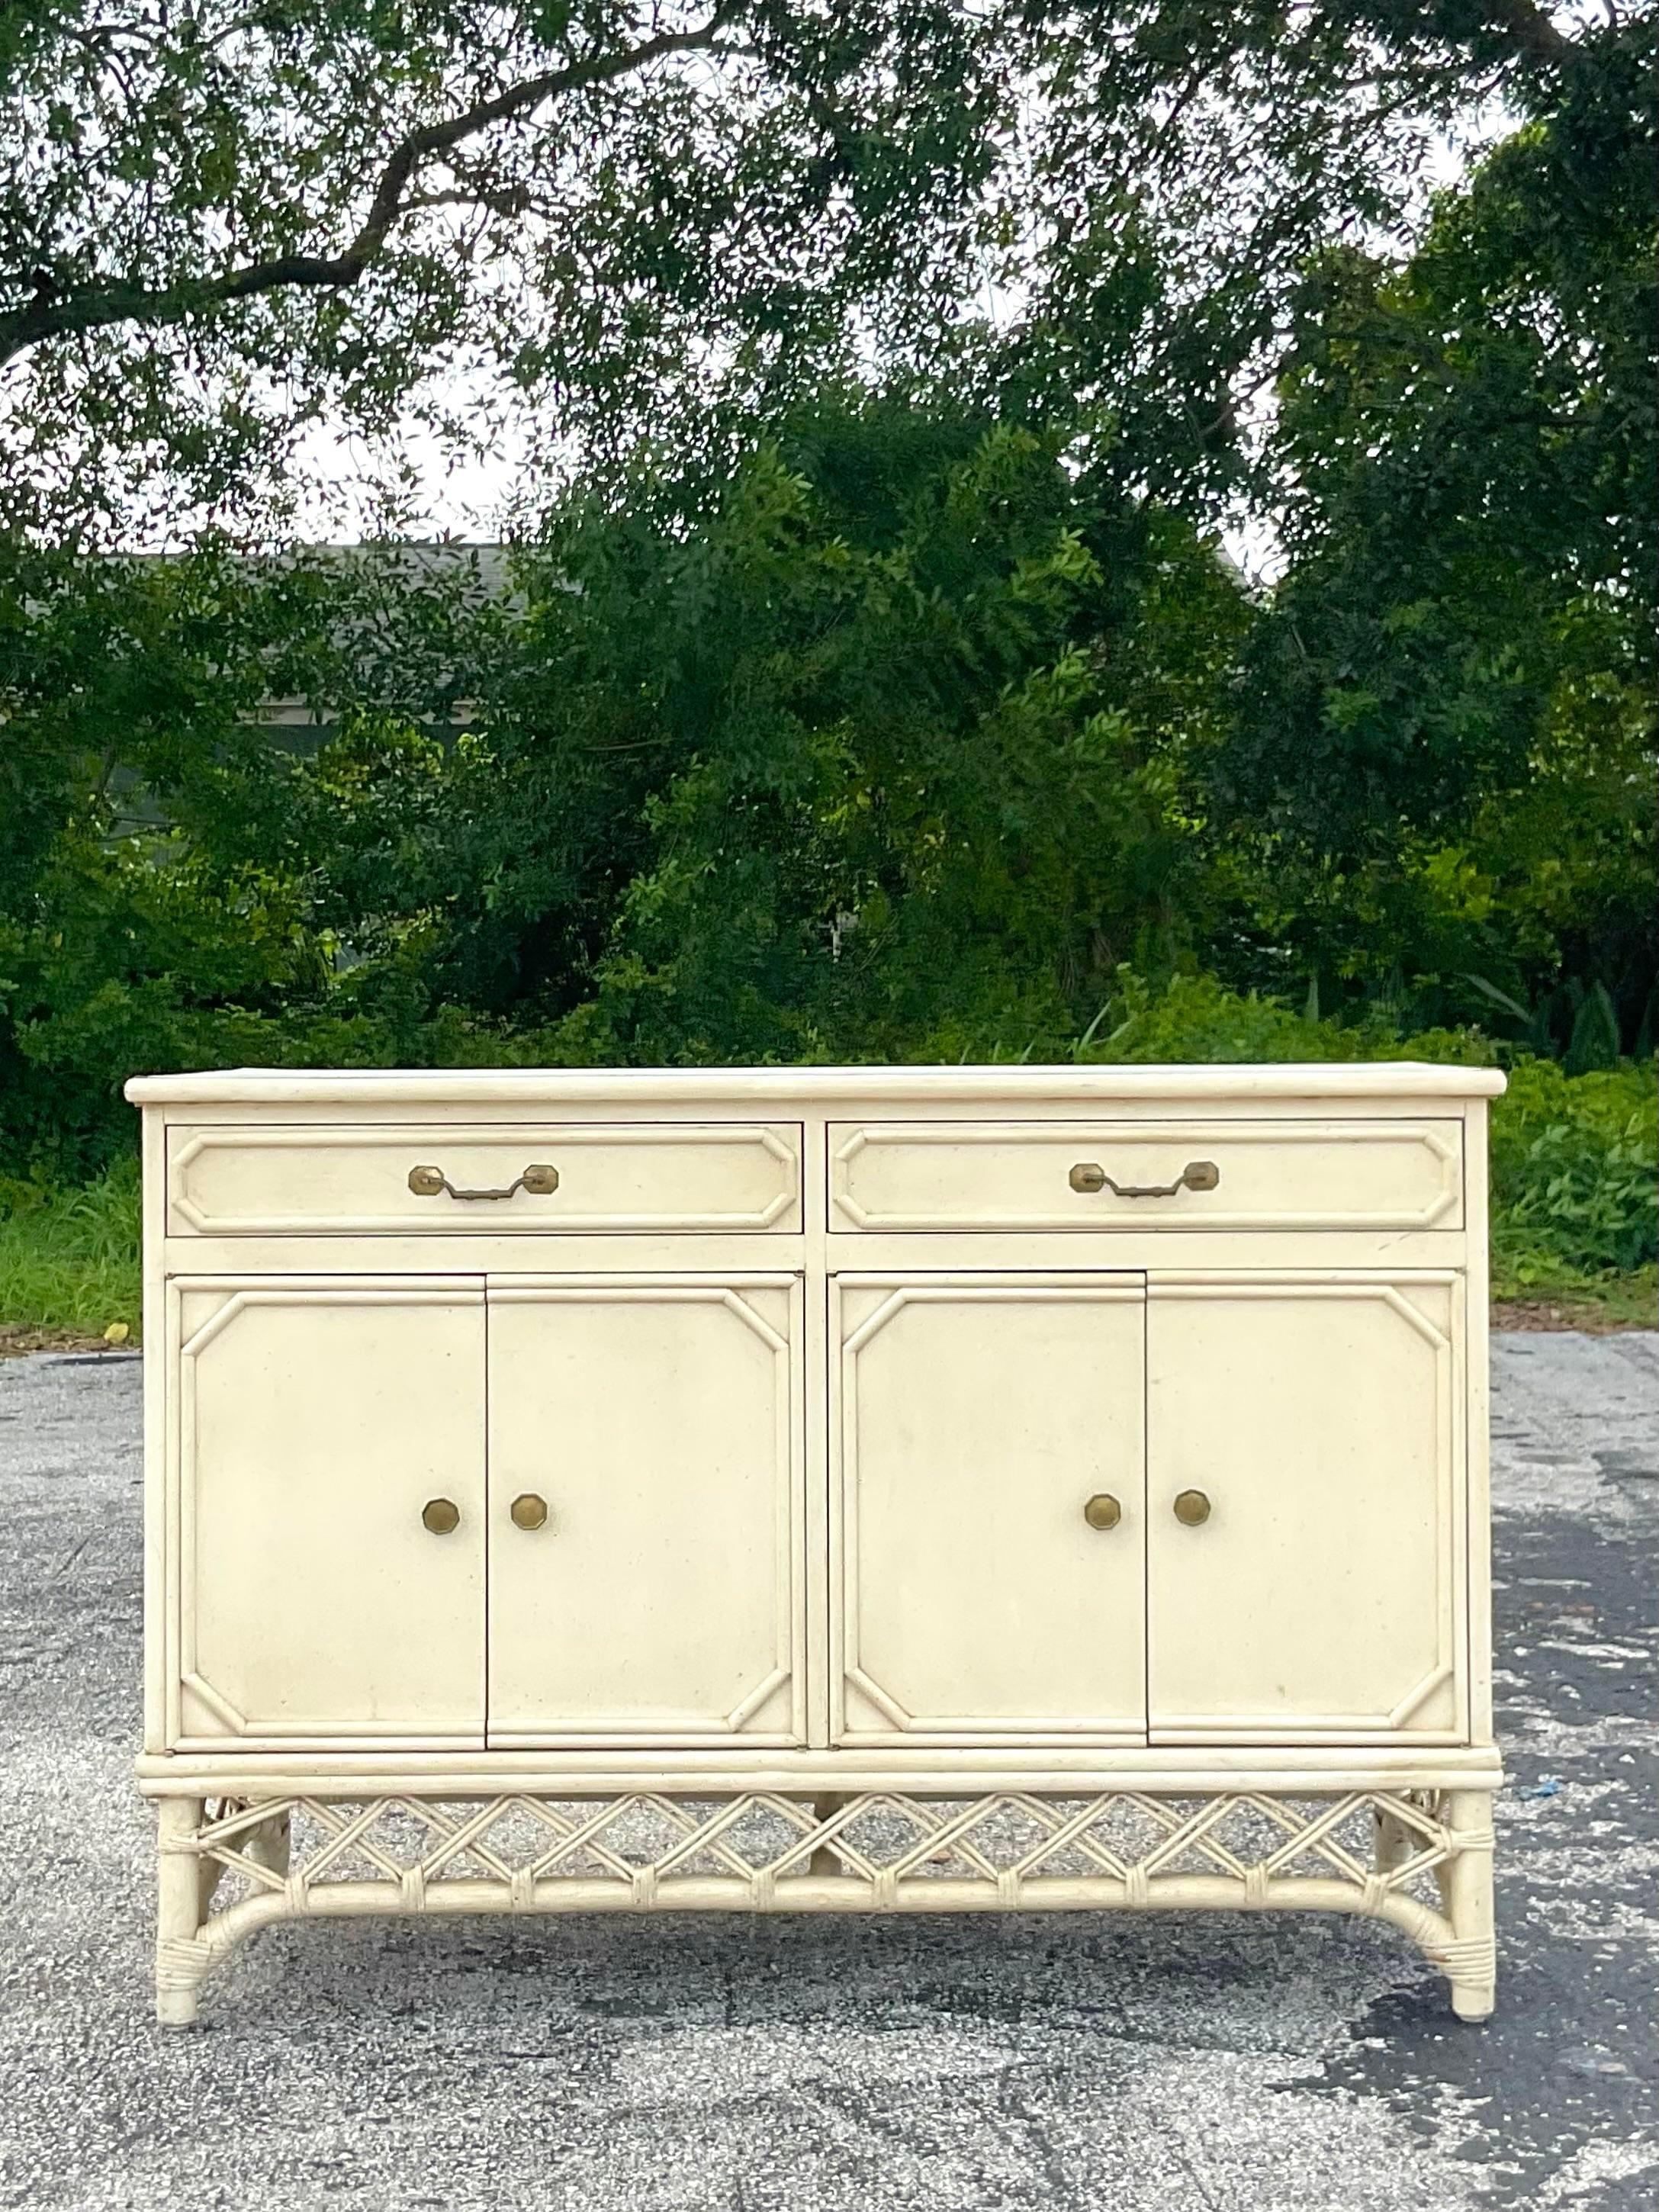 A fabulous vintage Coastal credenza. A chic wooden cabinet with rattan frame and lattice detail. Laminate top for extra protection. Signed on the inside drawer. Acquired from a Palm Beach estate.